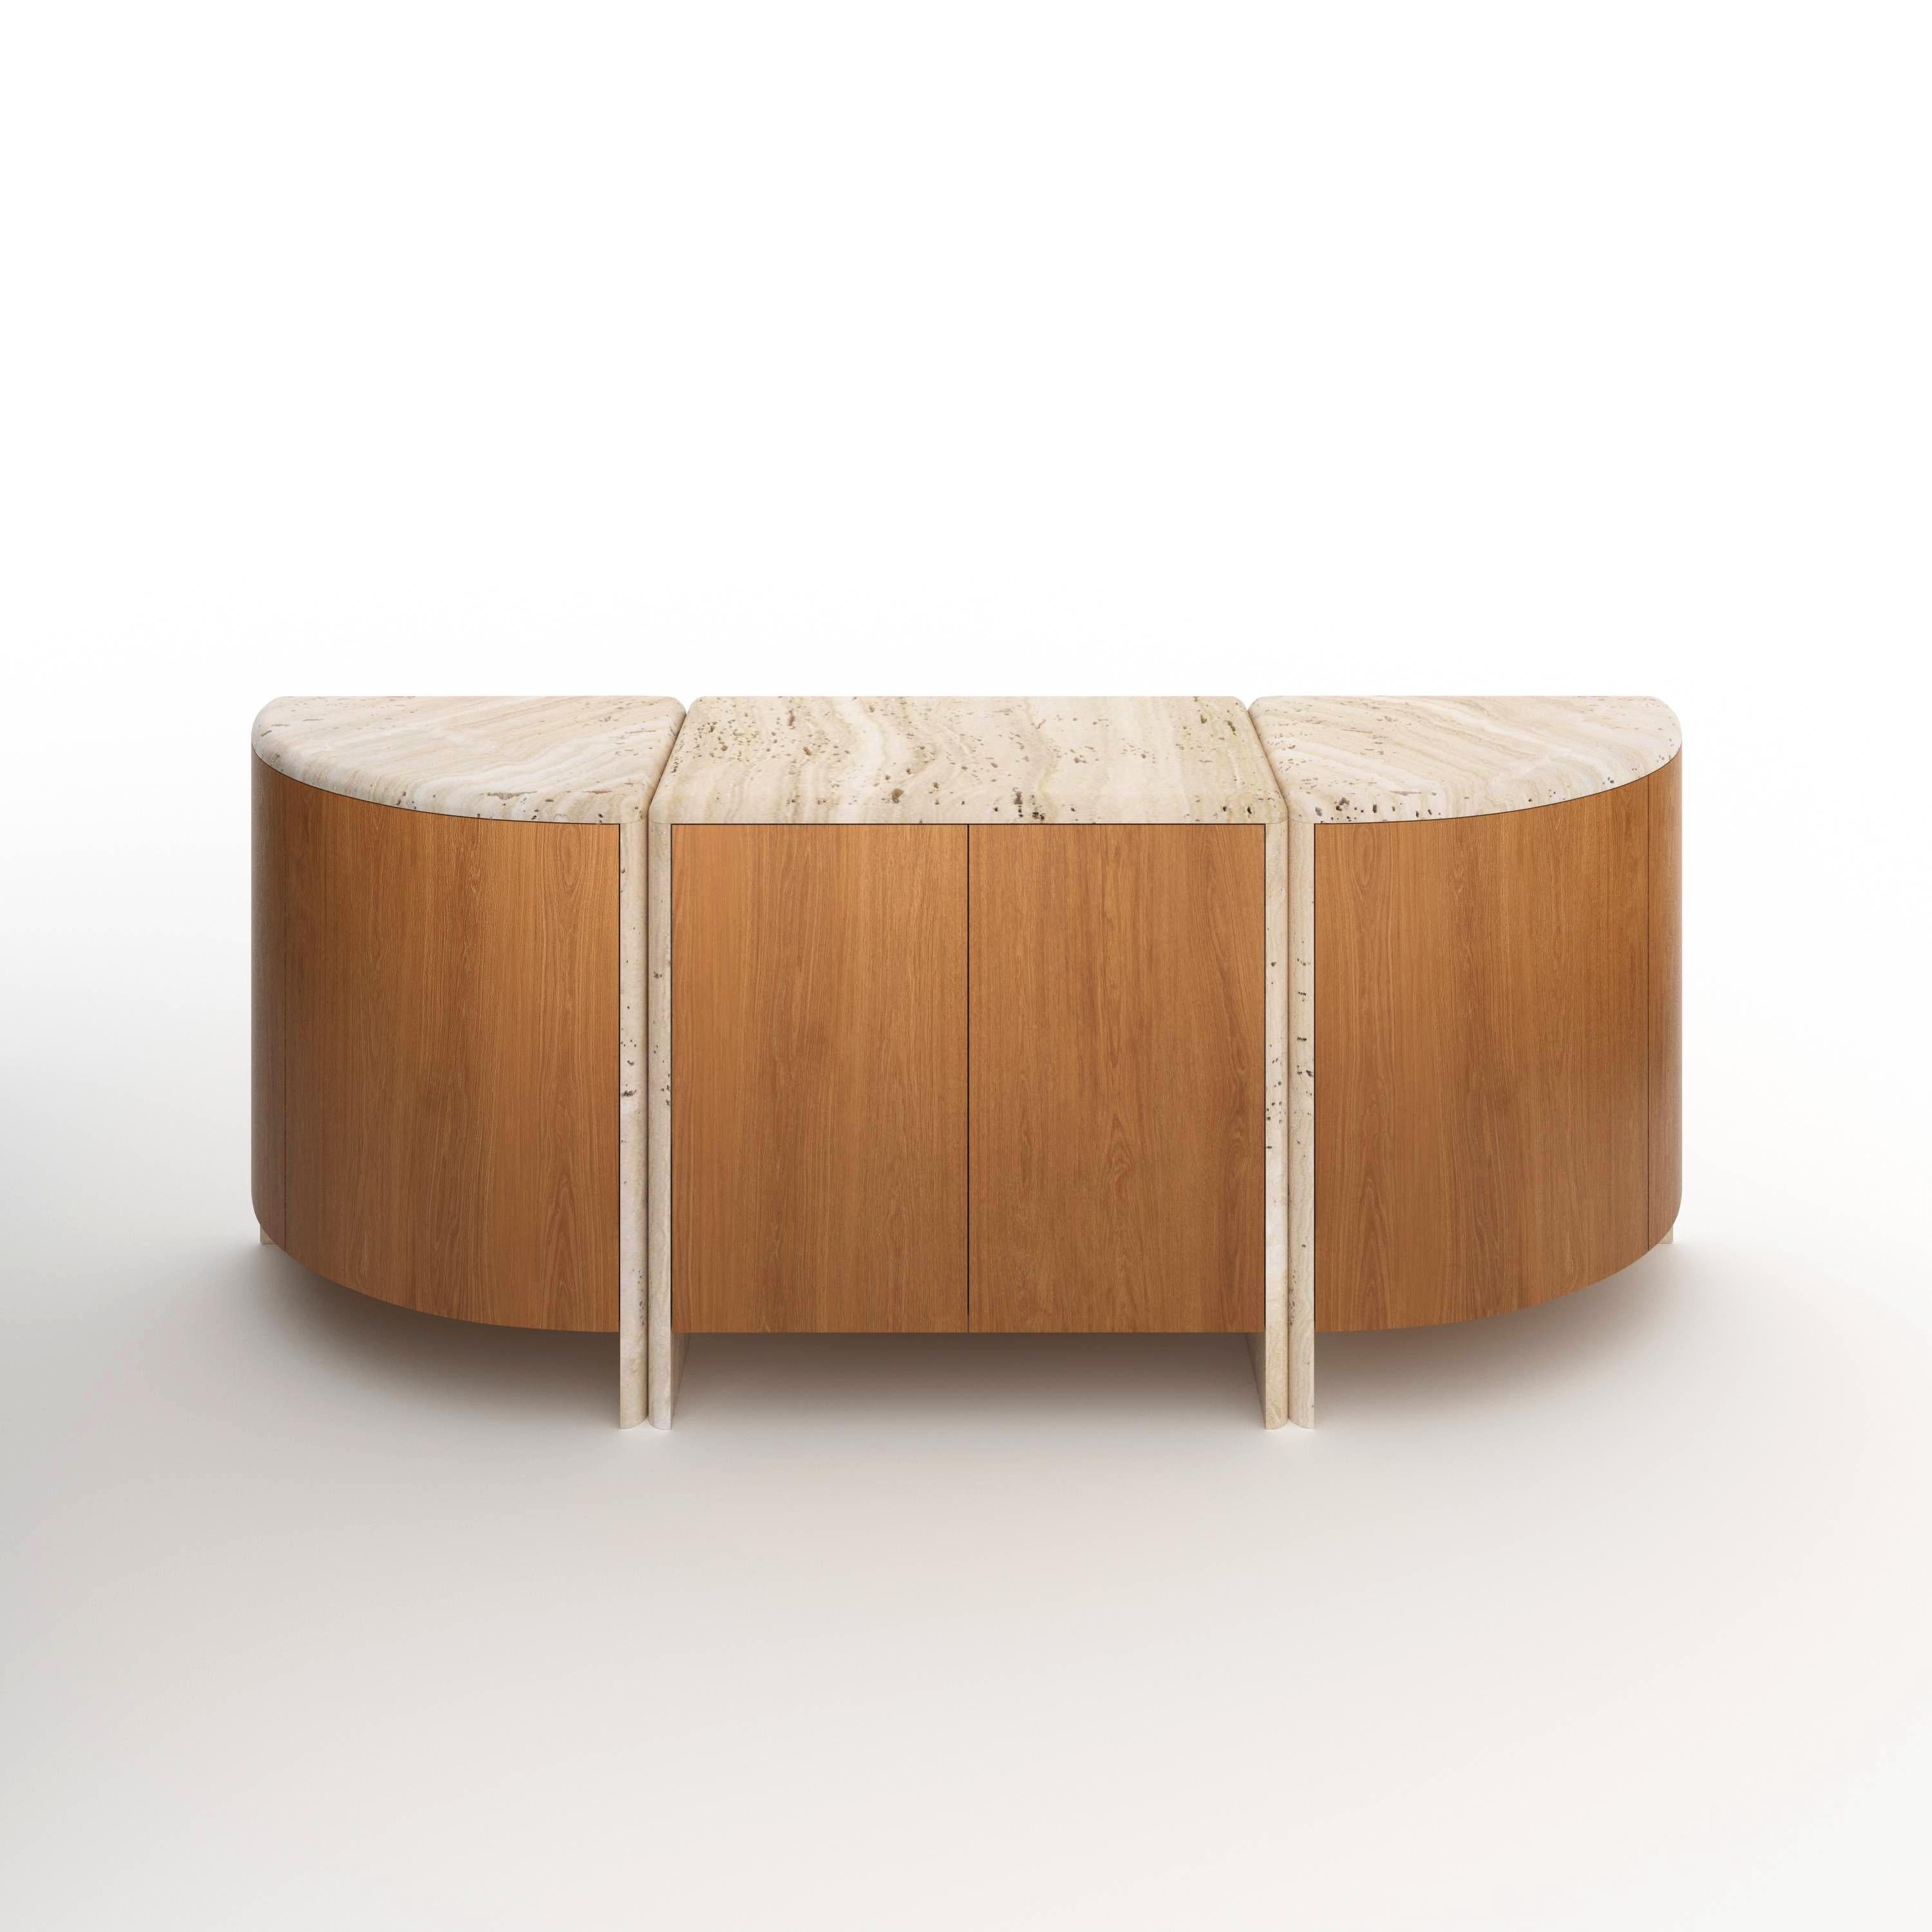 Italian Lily Rounded Credenza in Honed Unfilled Navona Travertine and Oak by Fred&Juul For Sale